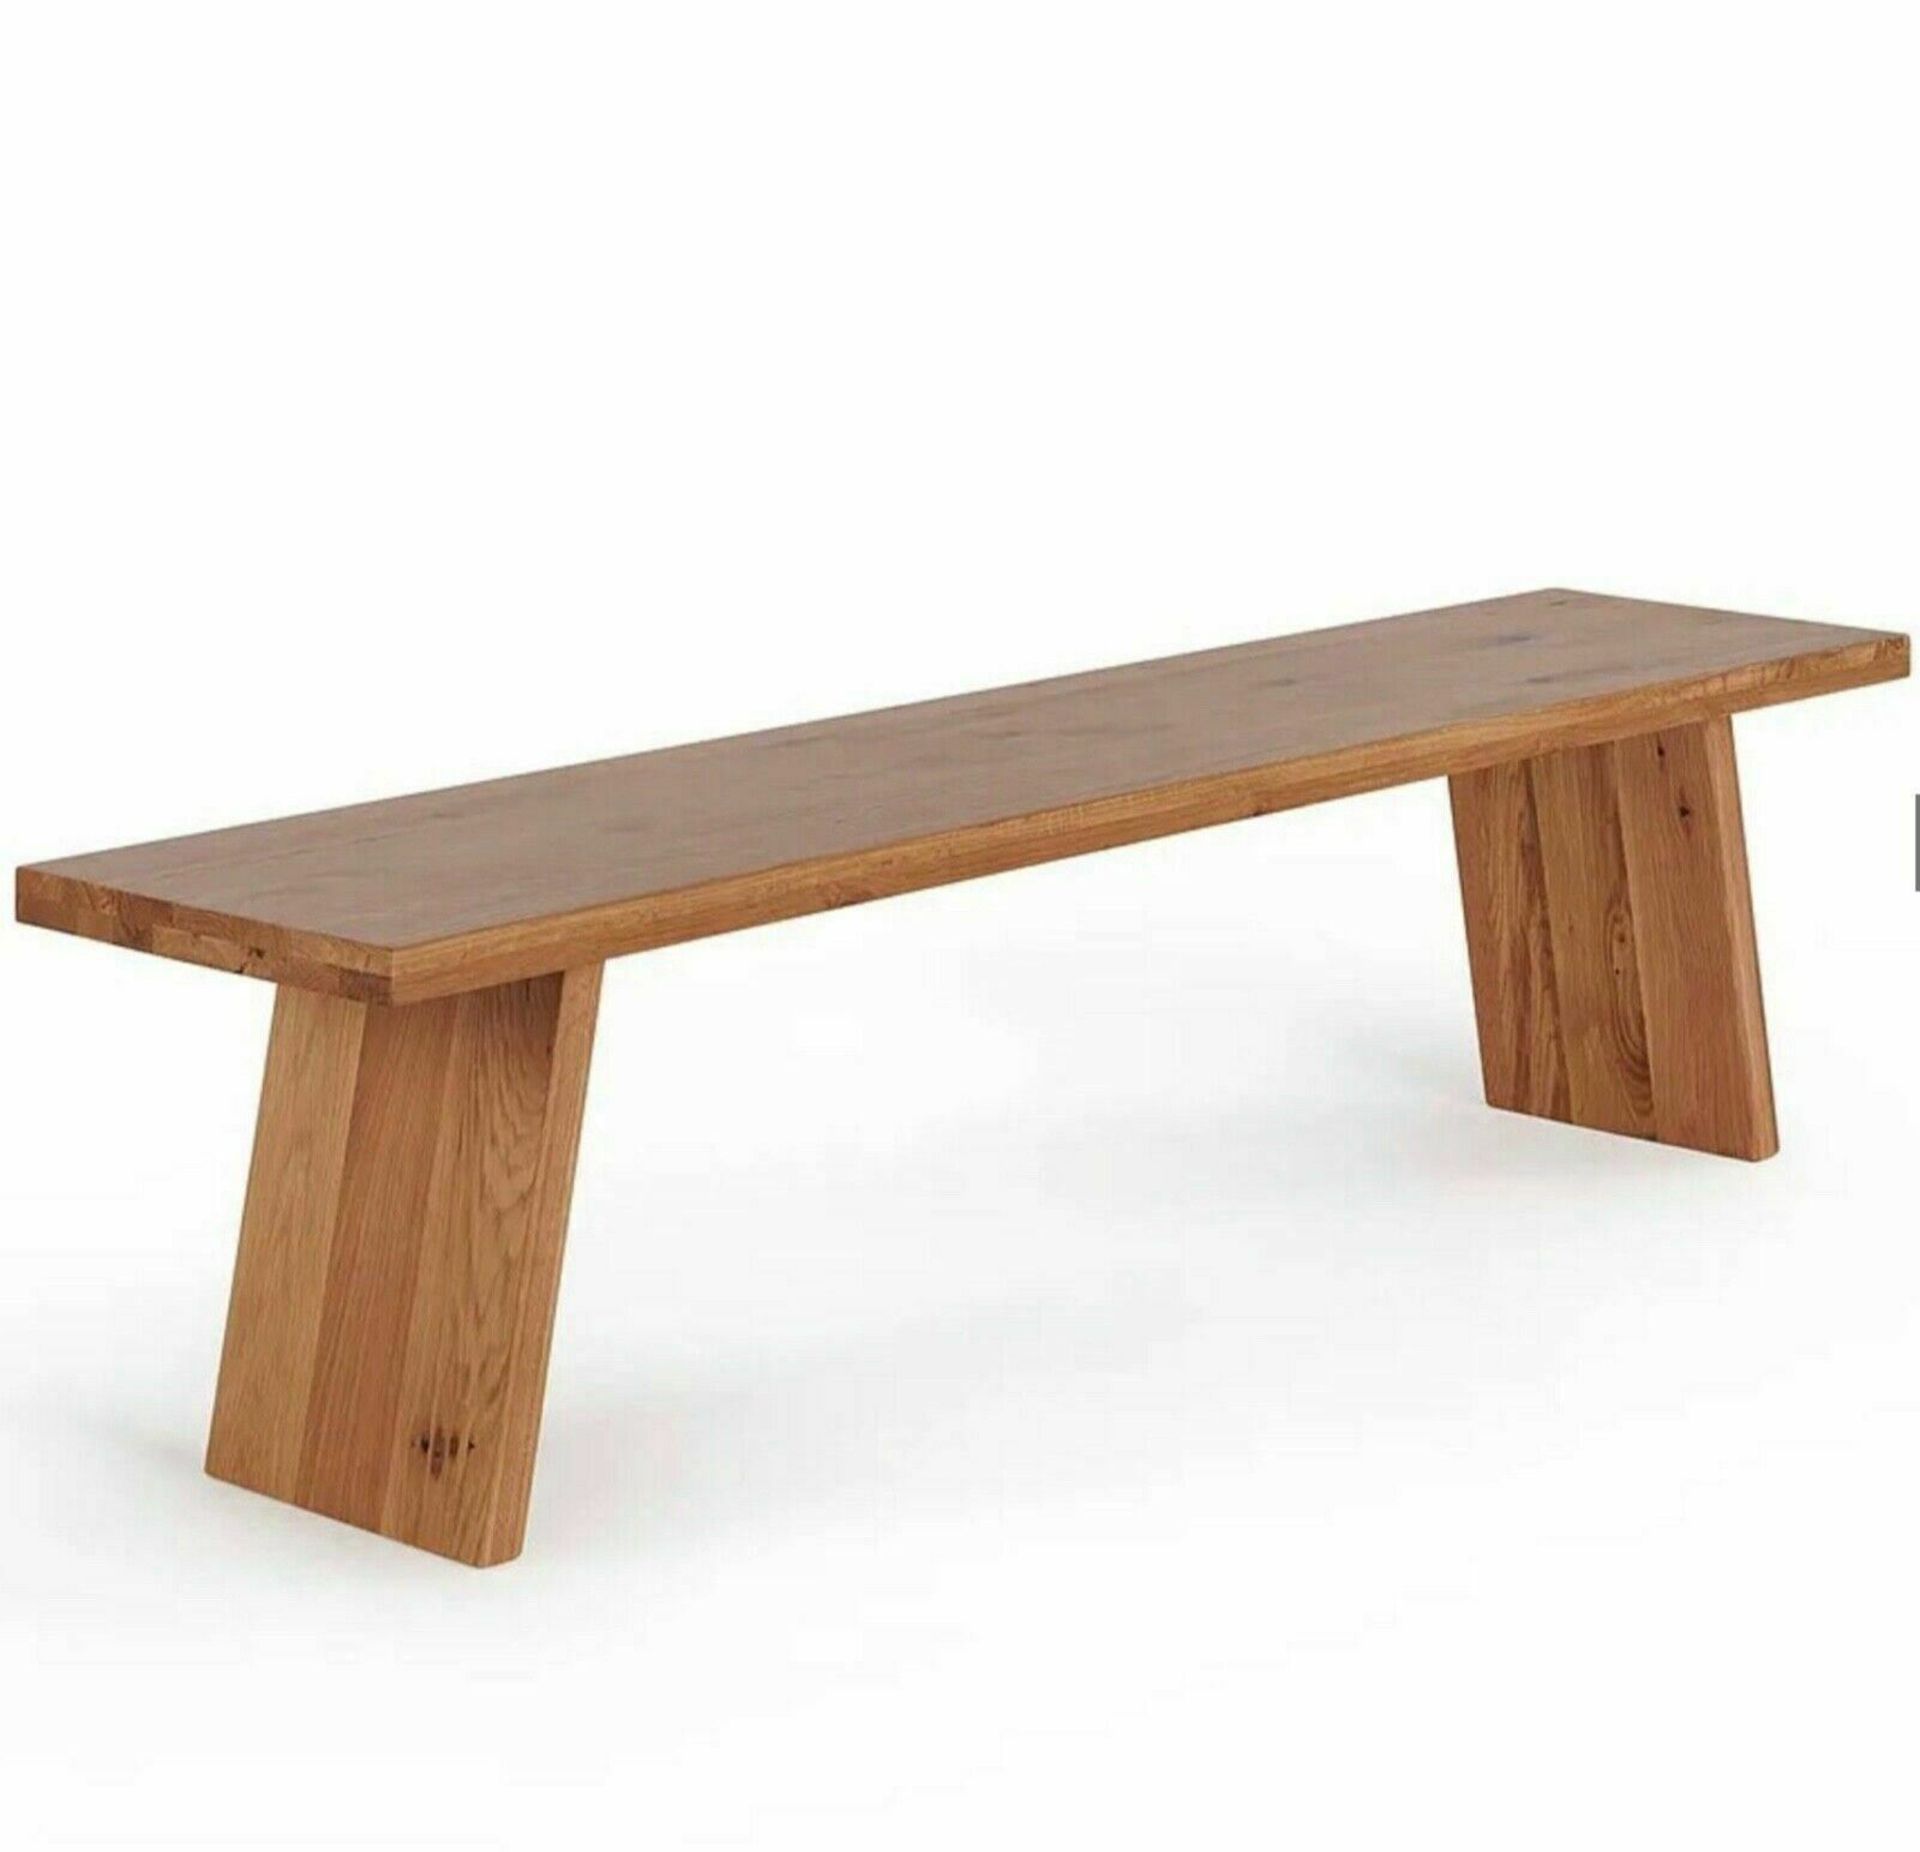 New Boxed - Cantilever Rustic Solid Oak Bench. 180cm Long. RRP £330 EACH. For a more open seating